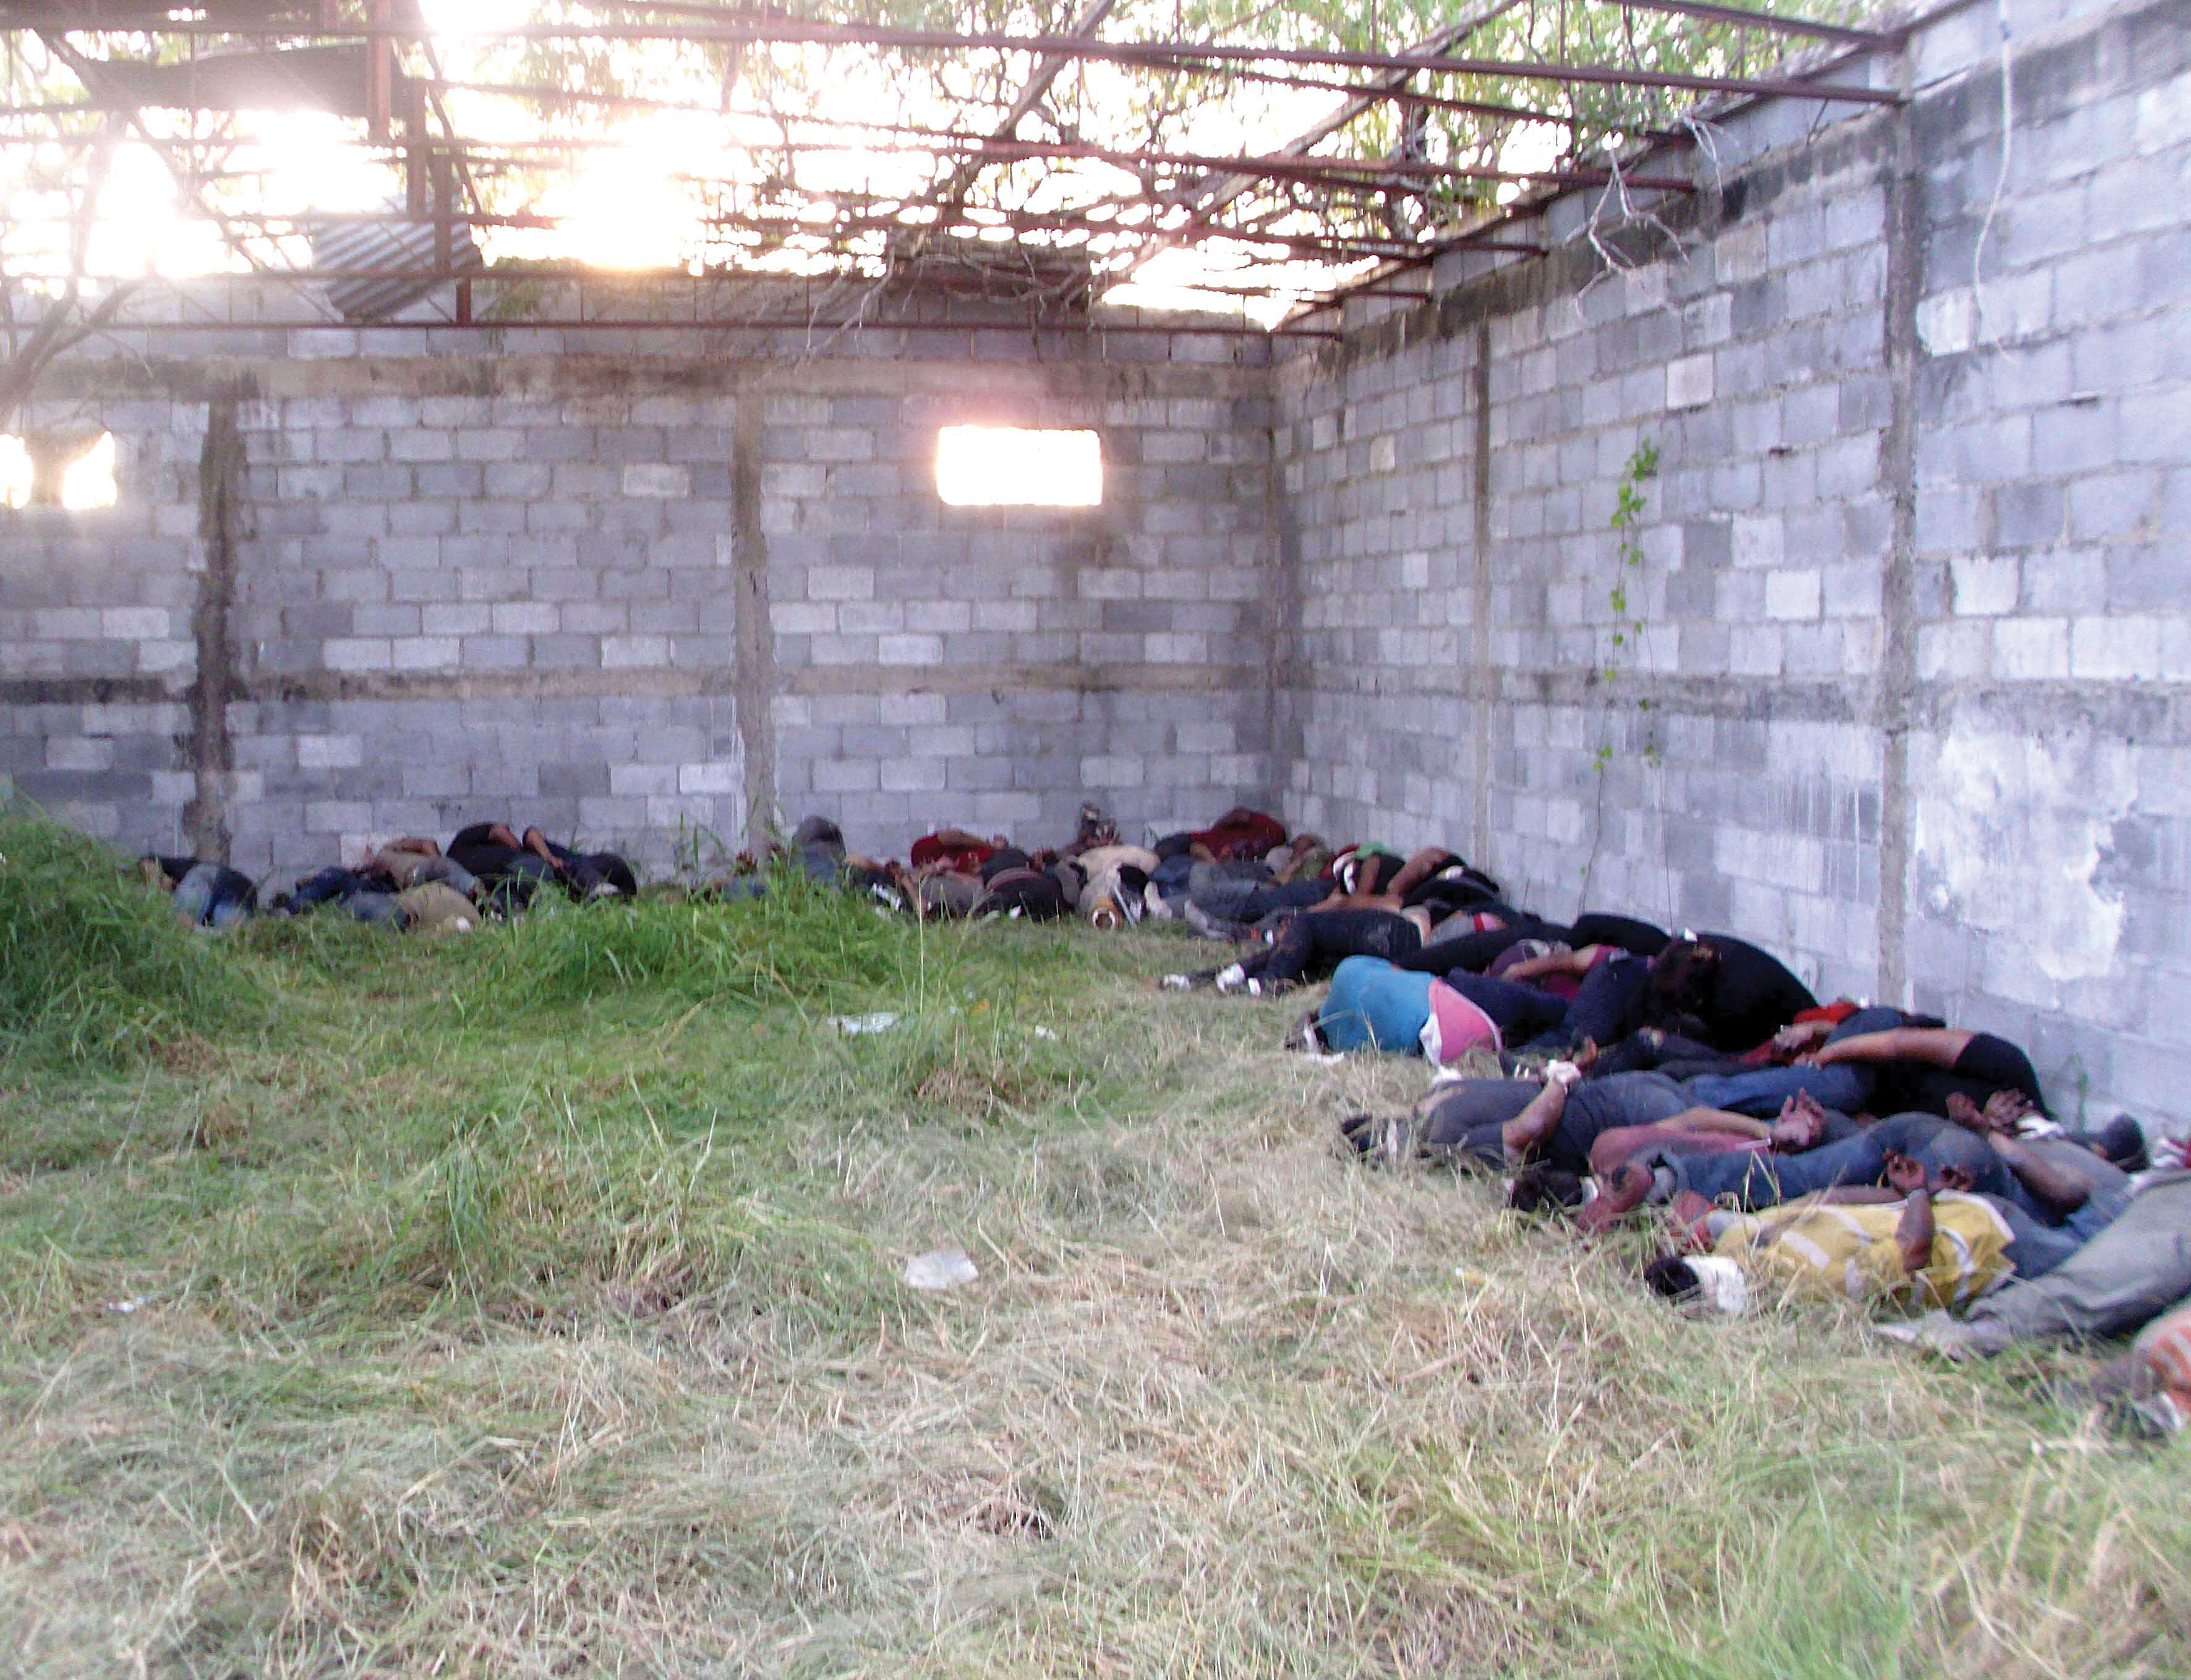 The bodies of 72 migrants allegedly killed by the Zetas drug gang were found in August 2010 in San Fernando, Tamaulipas. (Photo from the Associated Press/El Universal.)